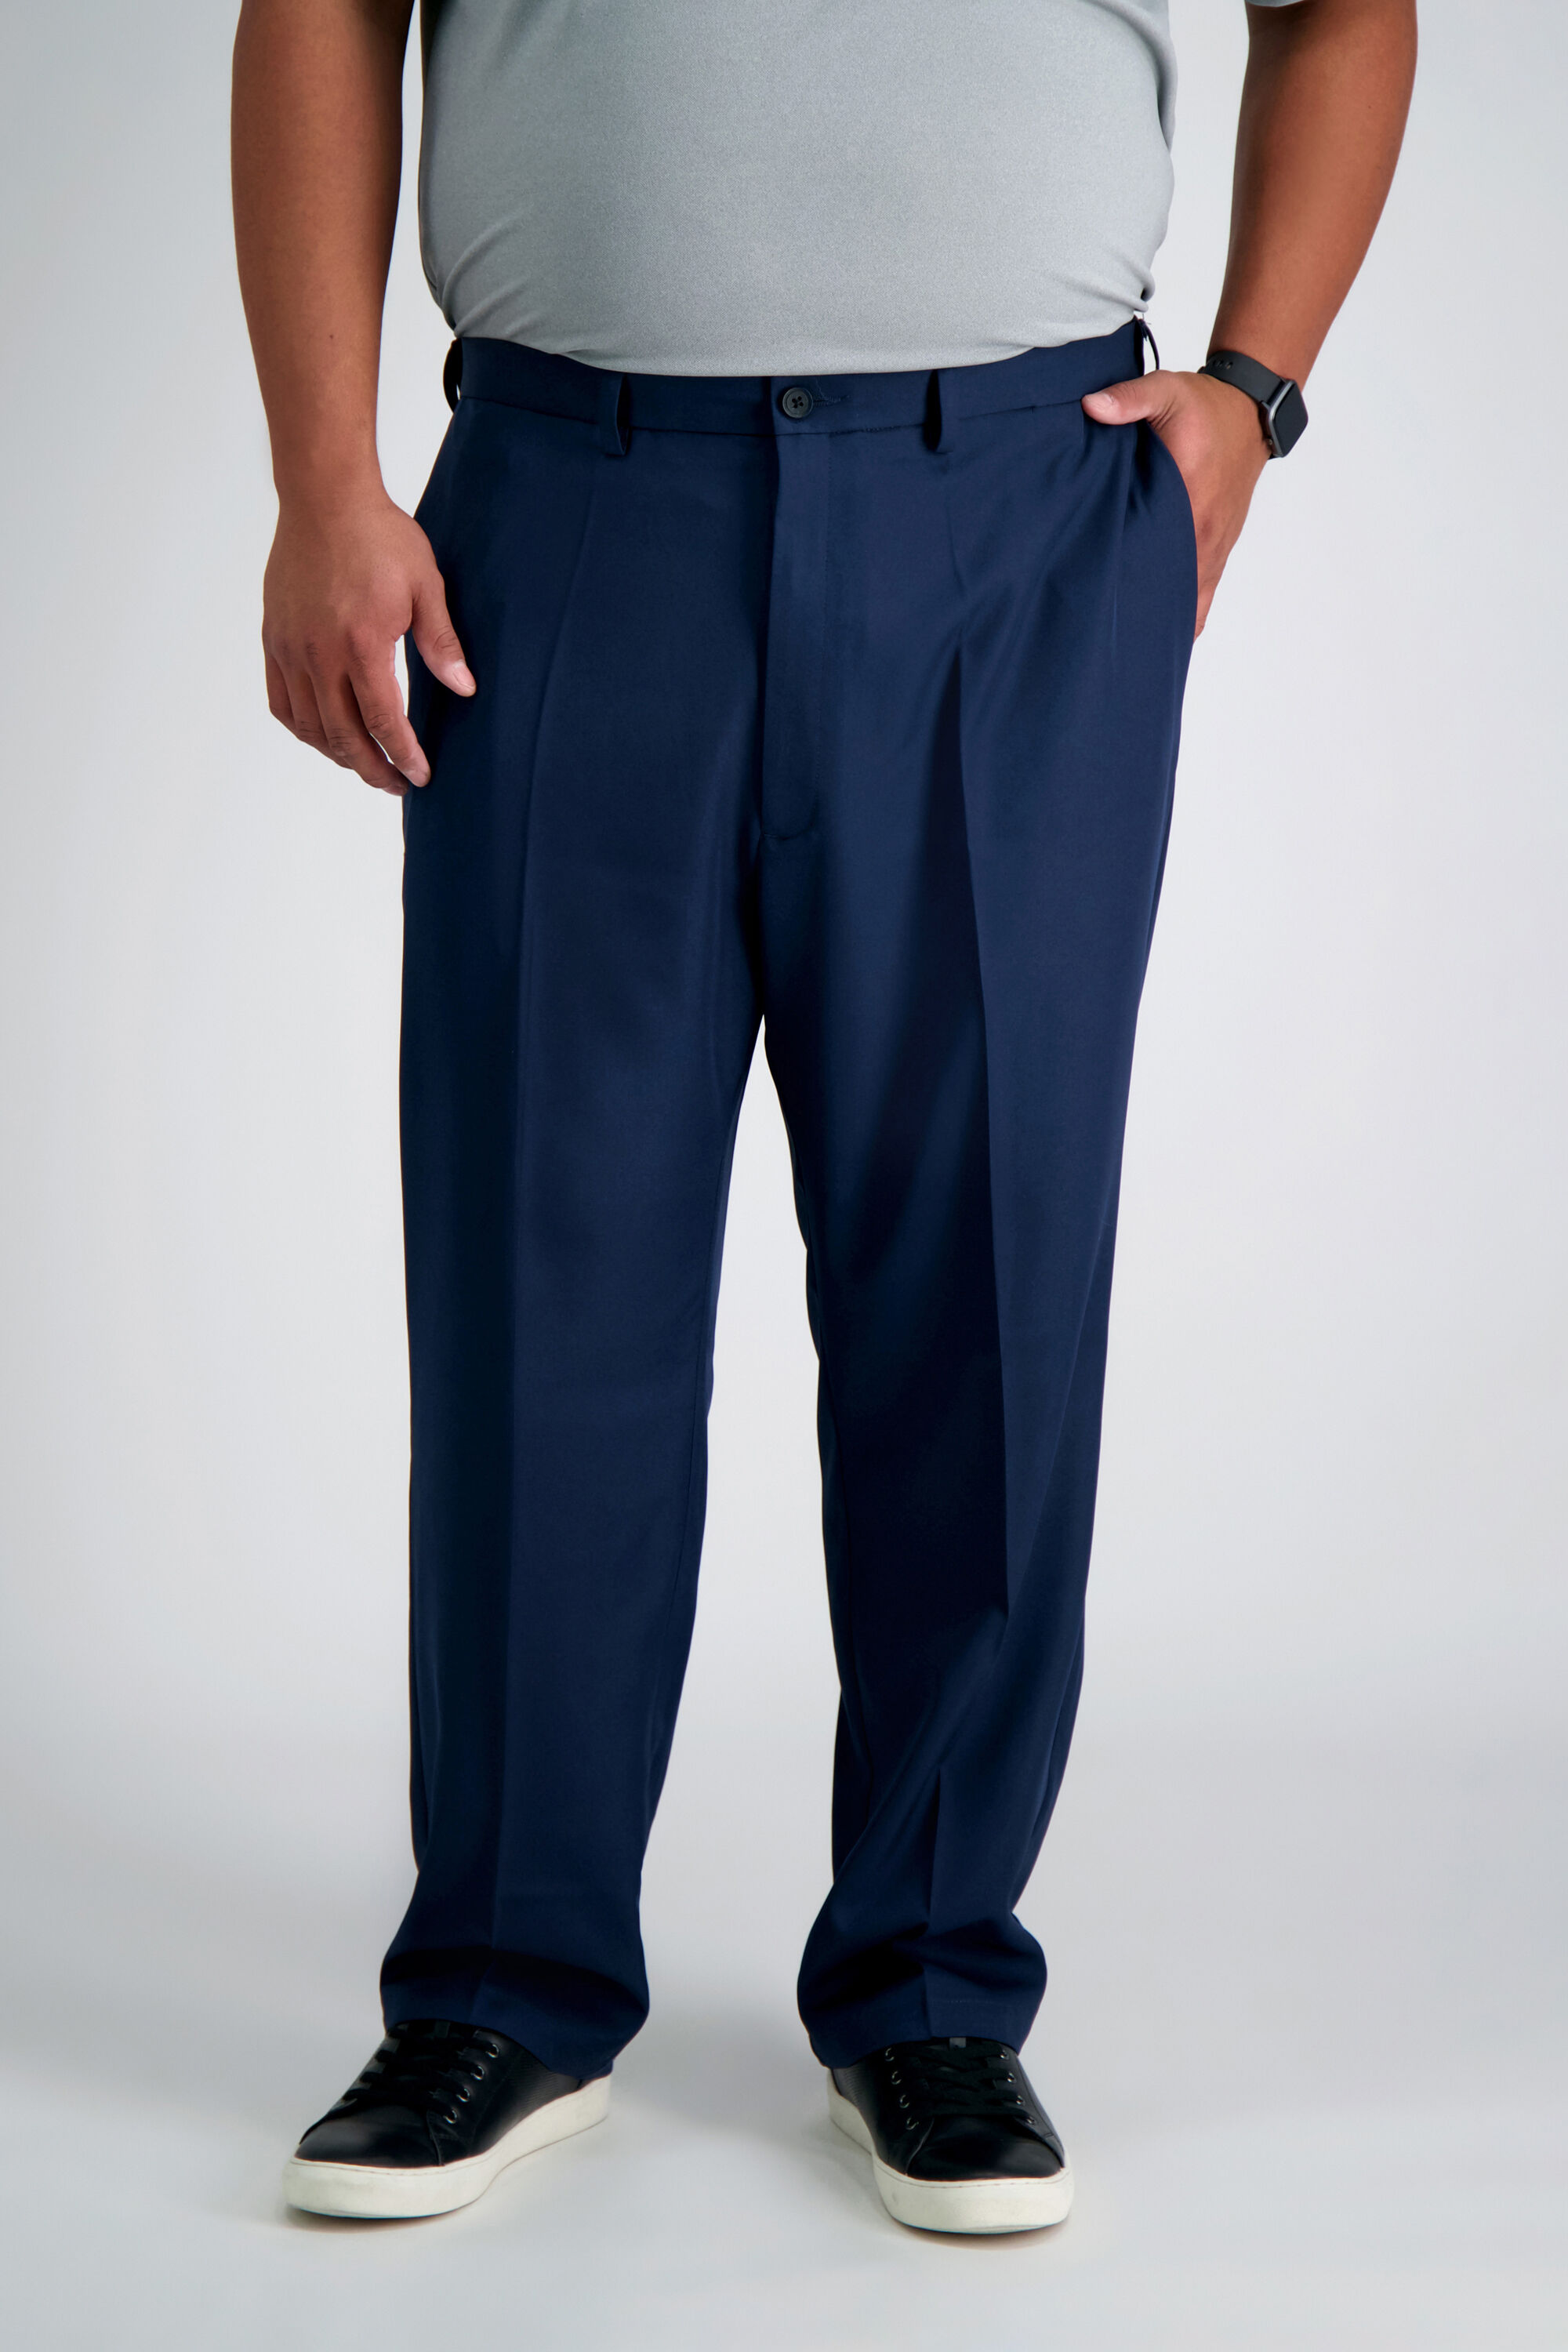 B&T Cool 18 Pro Pant | Classic Fit, Flat Front, Stretch, No Iron